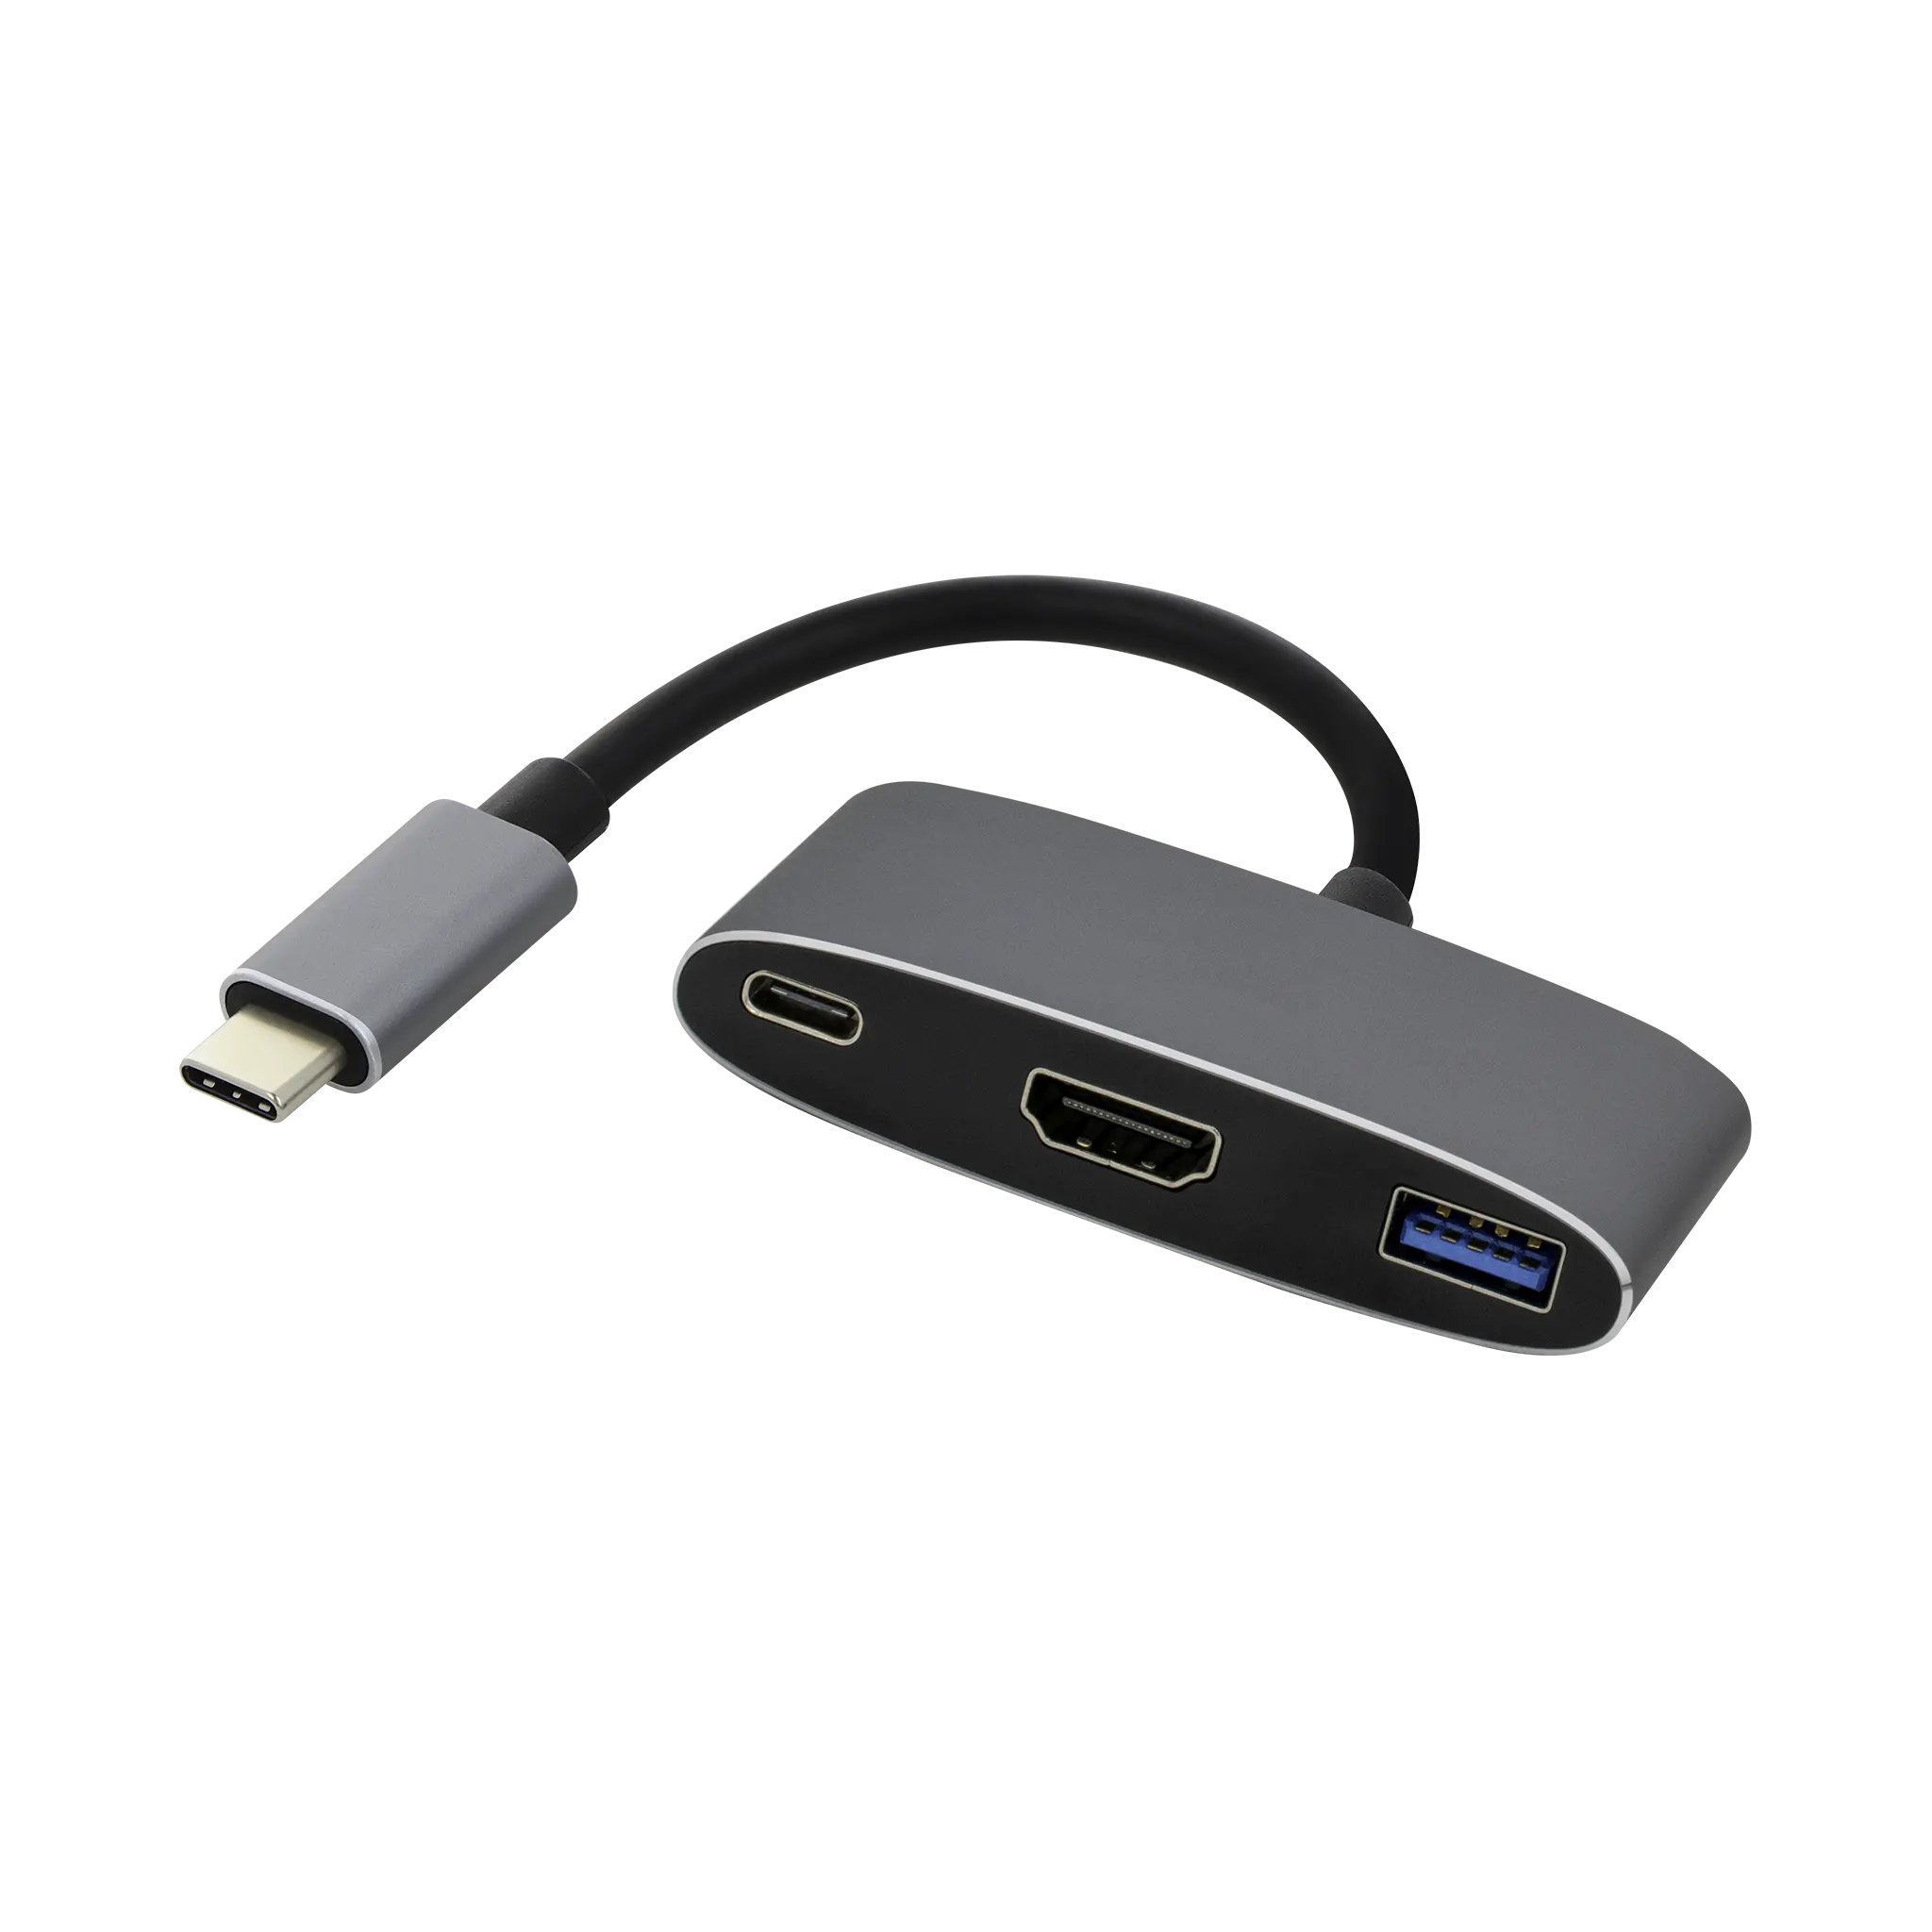 USB-C to HDMI, USB and USB-C with Power Delivery Adapter